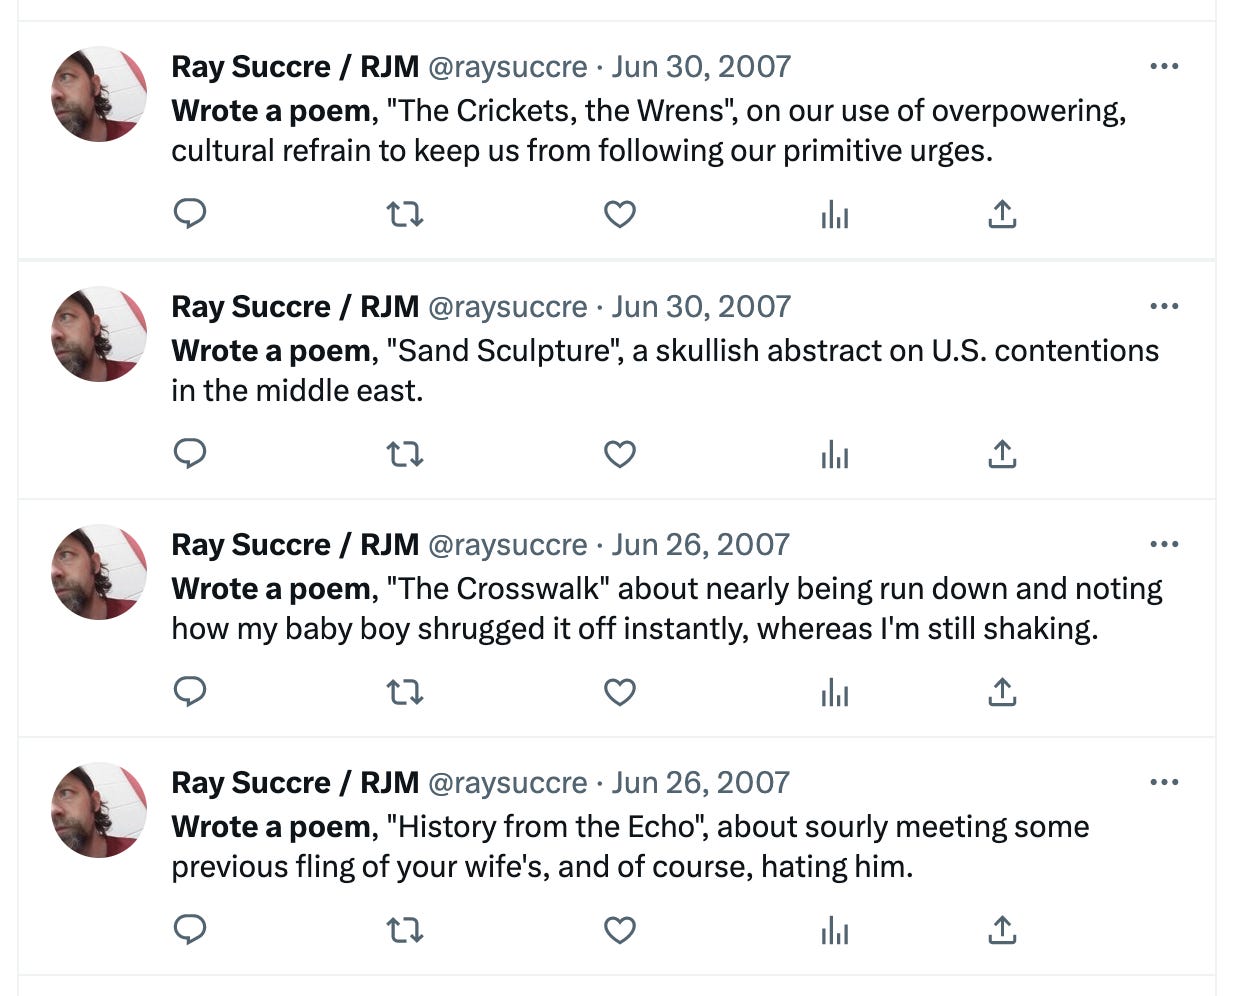 a series of tweets from "ray succre" that all begin "wrote a poem." one of them reads "wrote a poem, 'history from the echo', about sourly meeting some previous fling of your wife's, and of course, hating him"